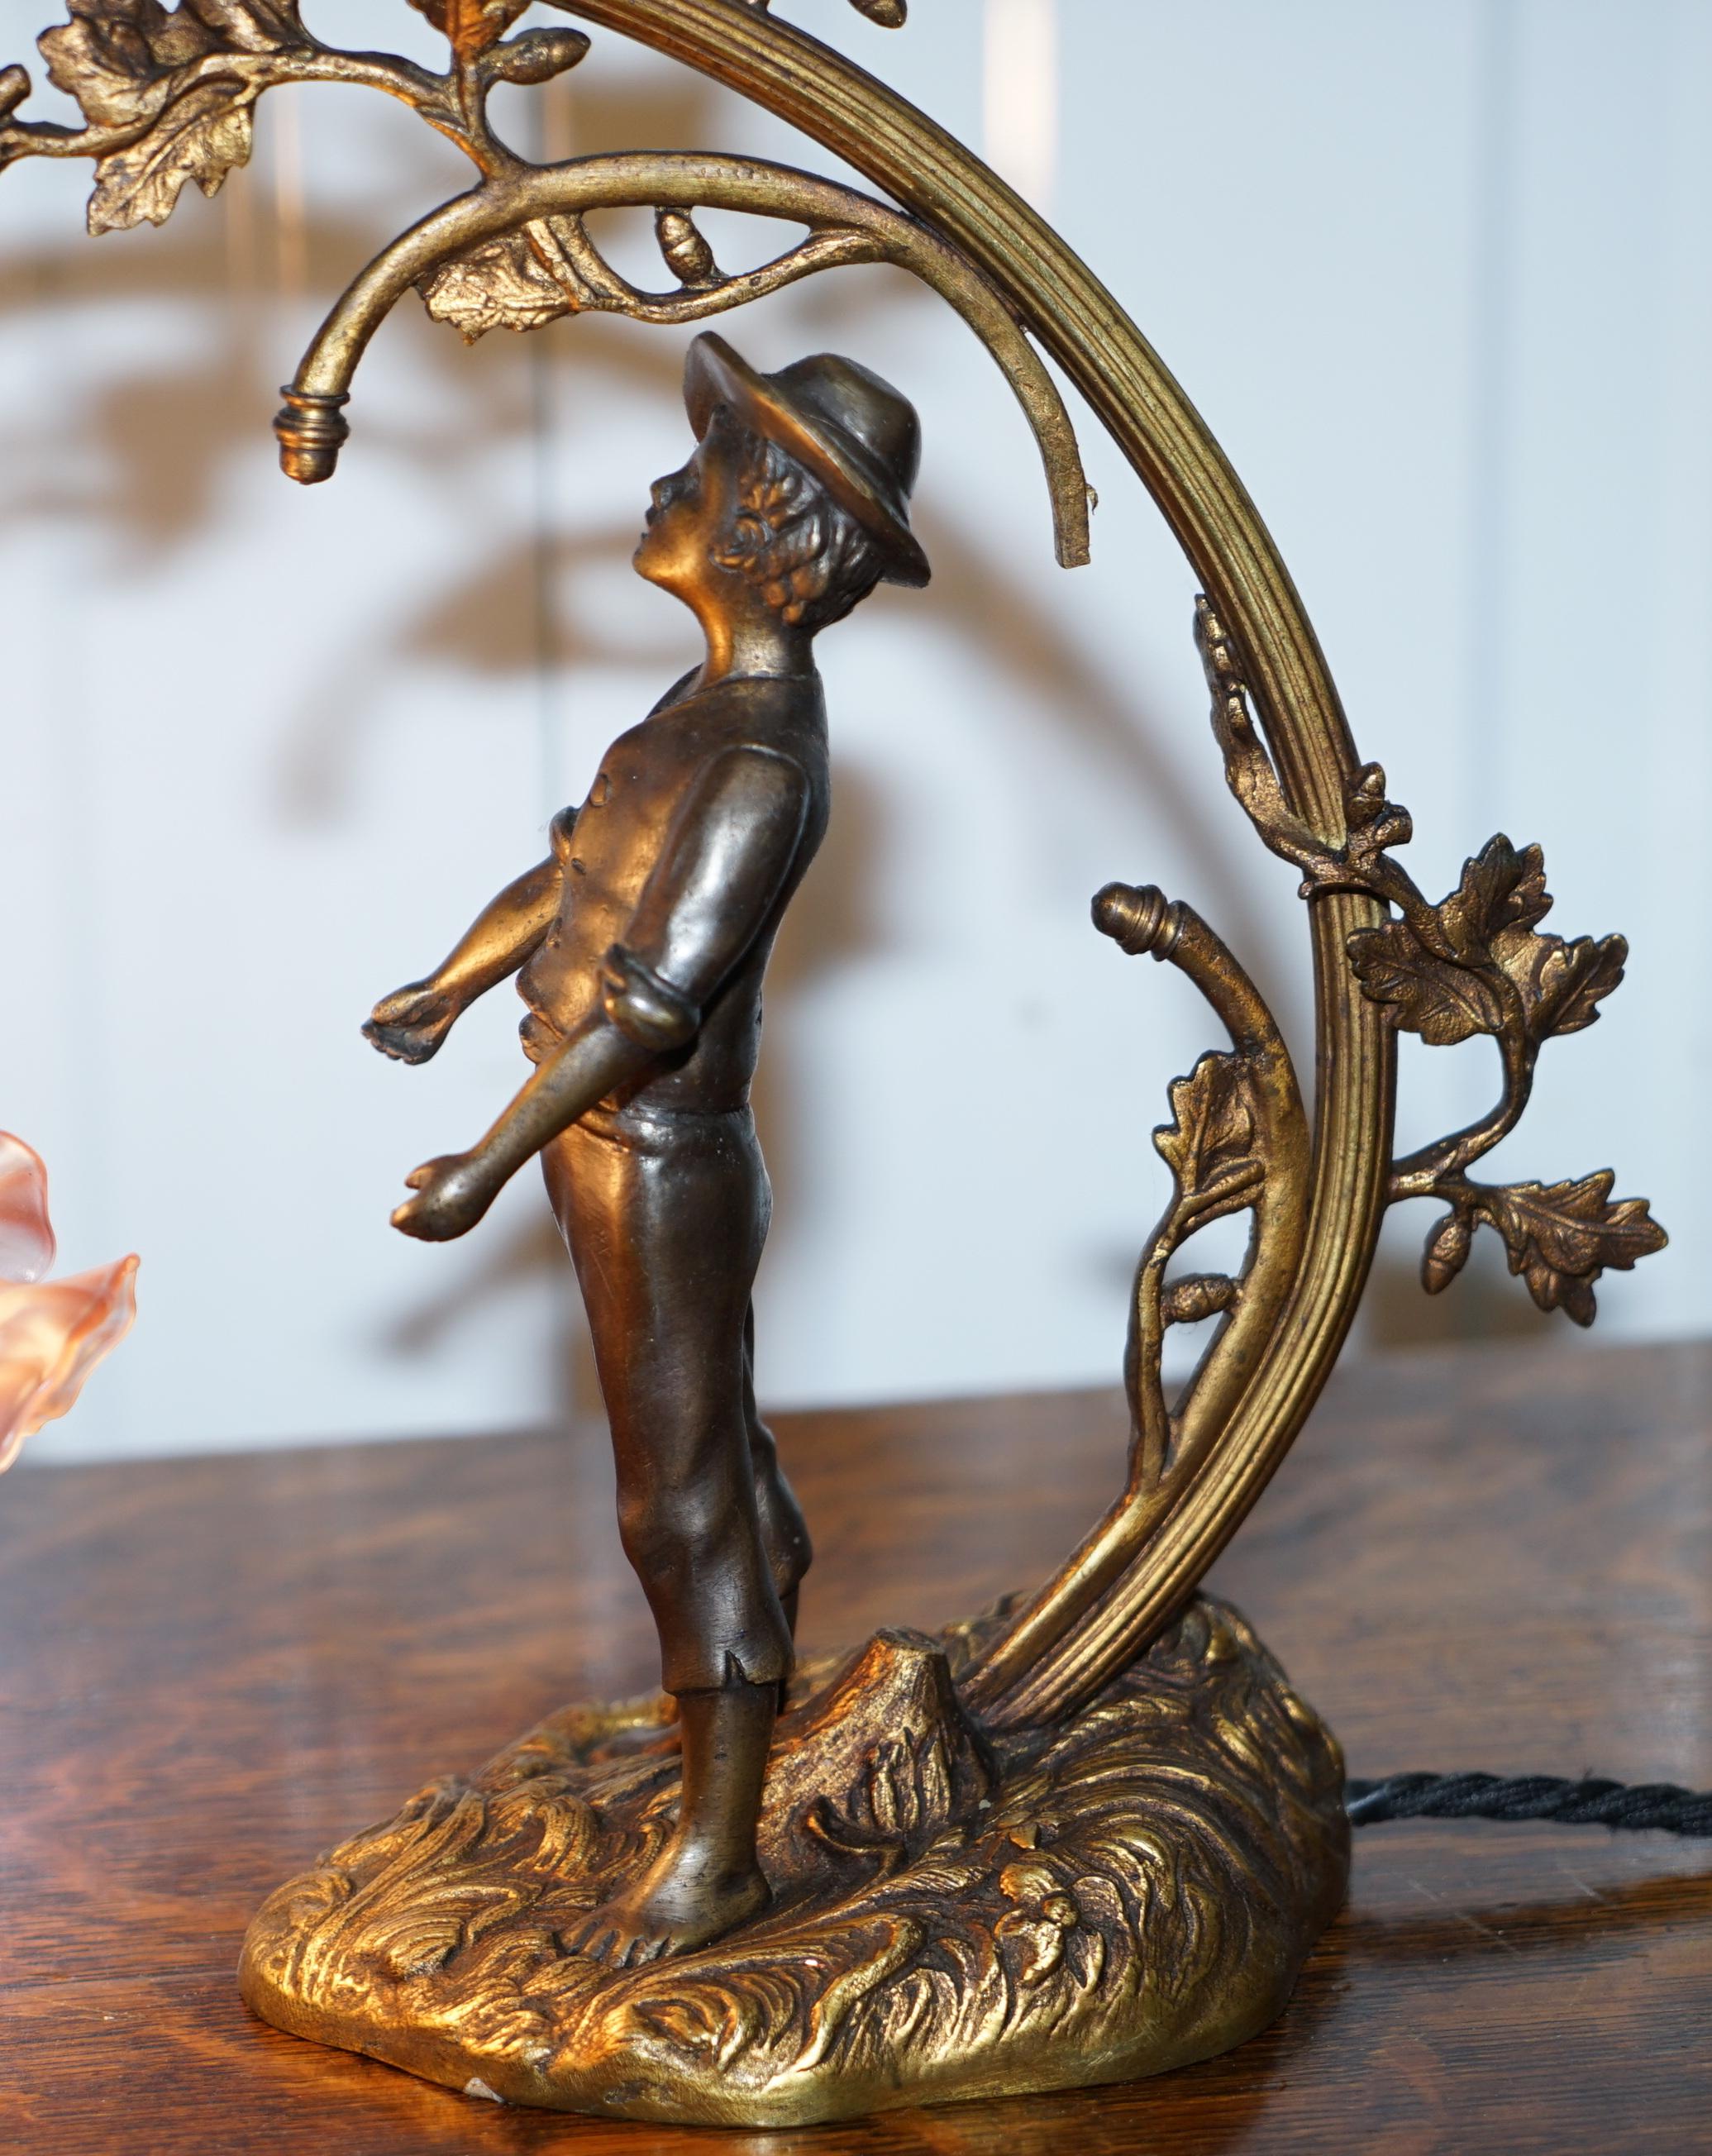 Stunning Solid Bronze circa 1920 Table Lamp with Statue Original Shade Rare Find 5